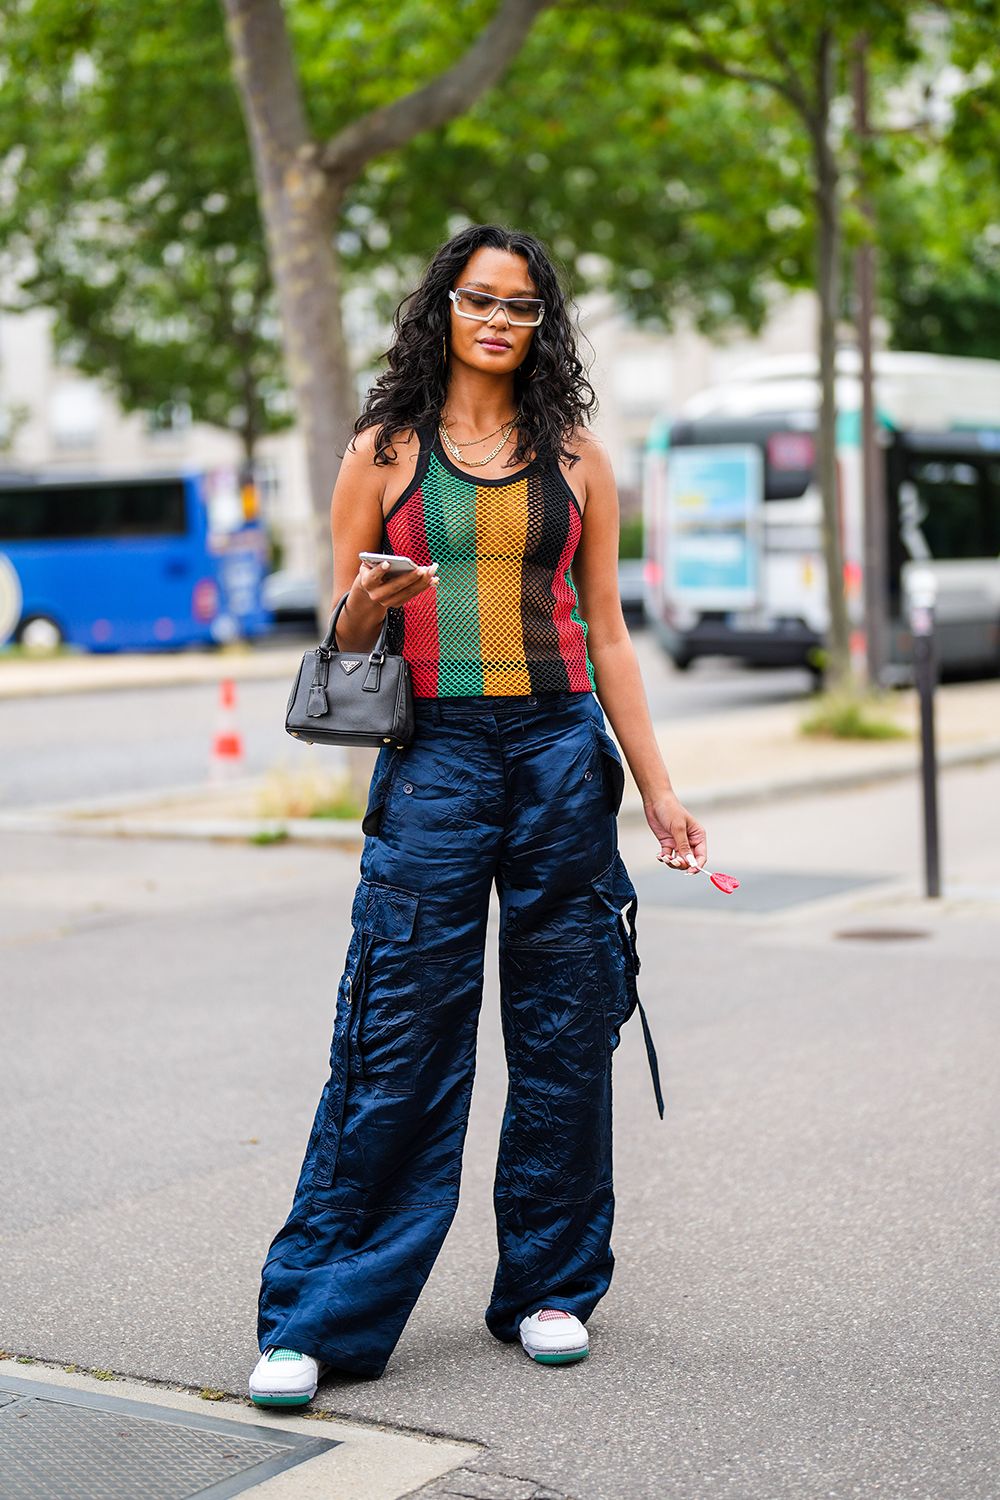 Y2K Fashion Trends Are Dominating the Streets of Paris—Yes, Really